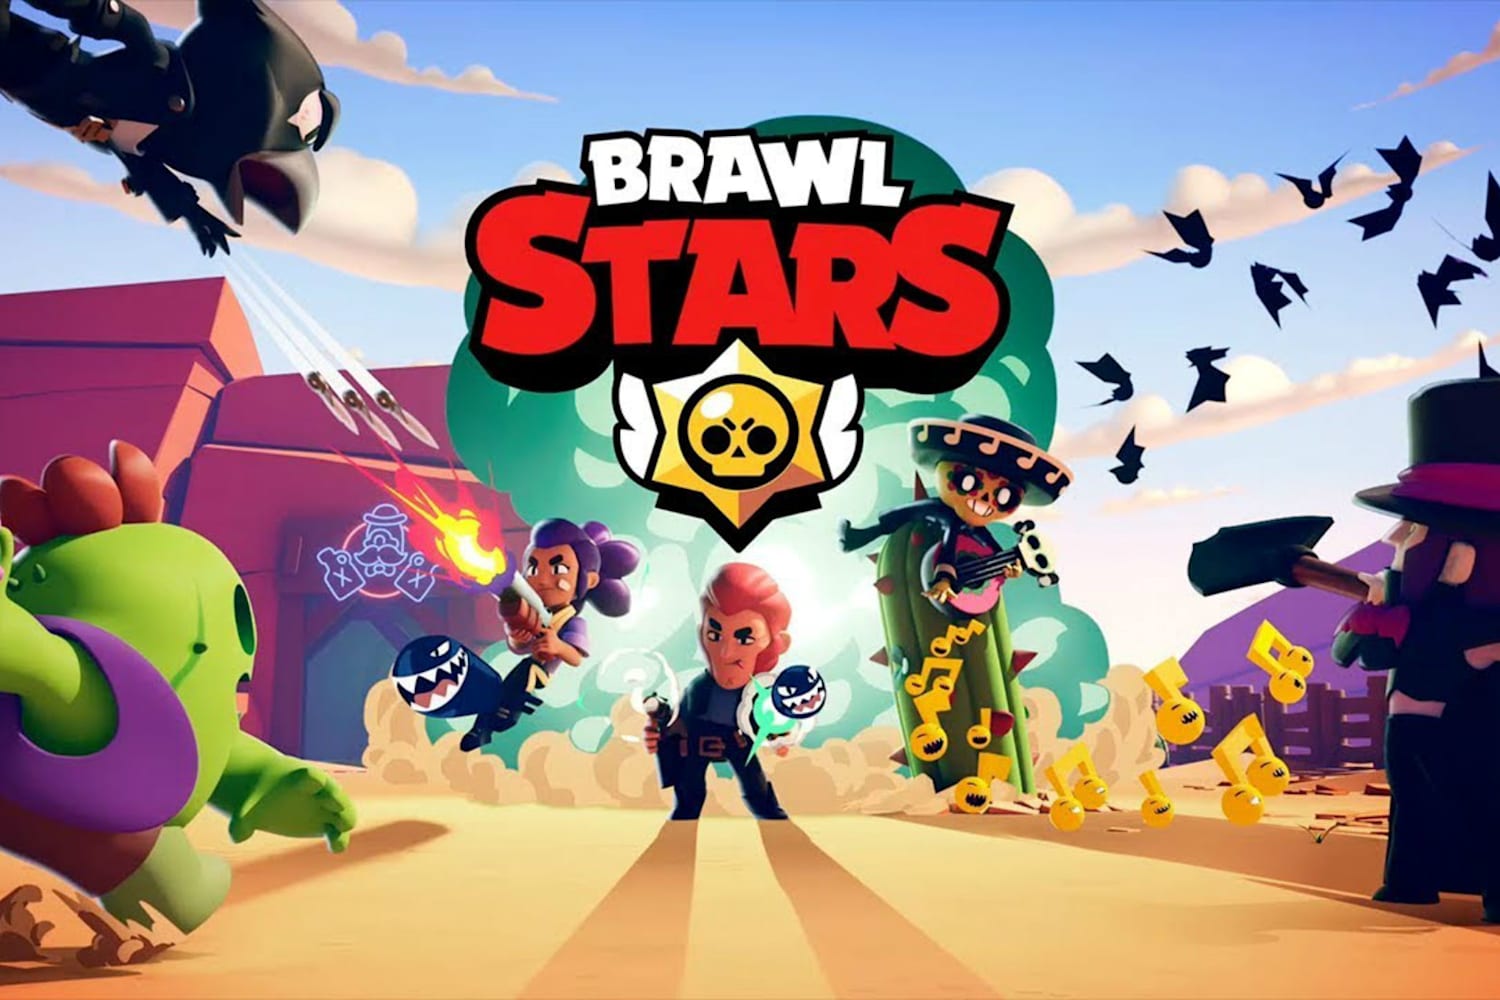 How To Play Brawl Stars 2020 Playing Guide - brawl stars doesn't open